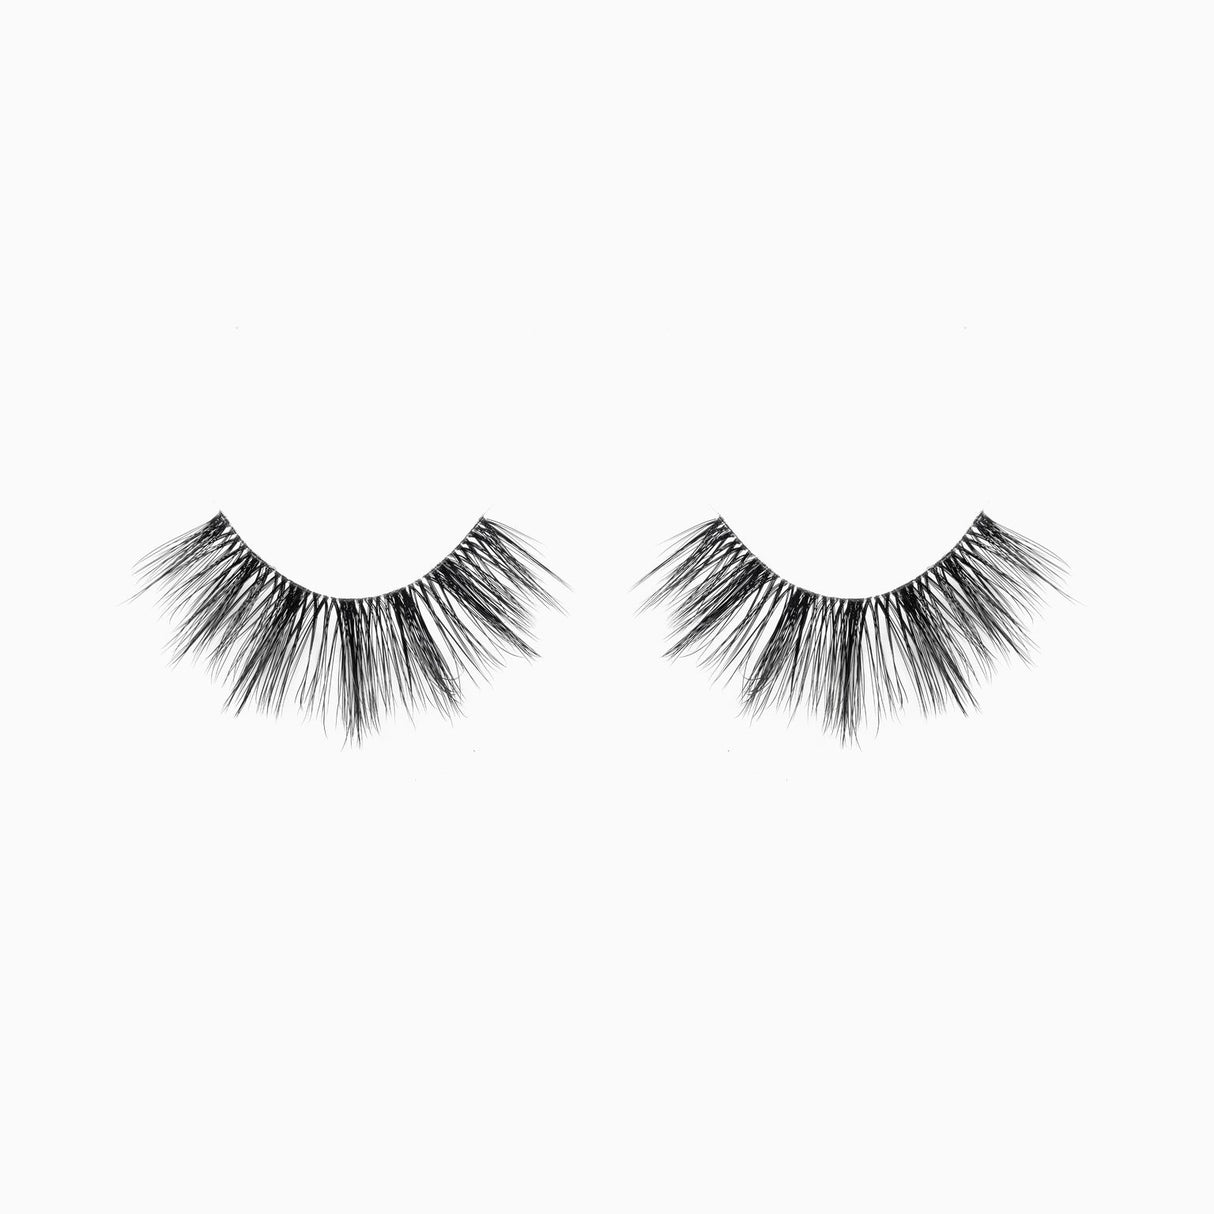 BEAUTY CREATIONS - TAKE ME SOMEWHERE LASHES COLLECTION